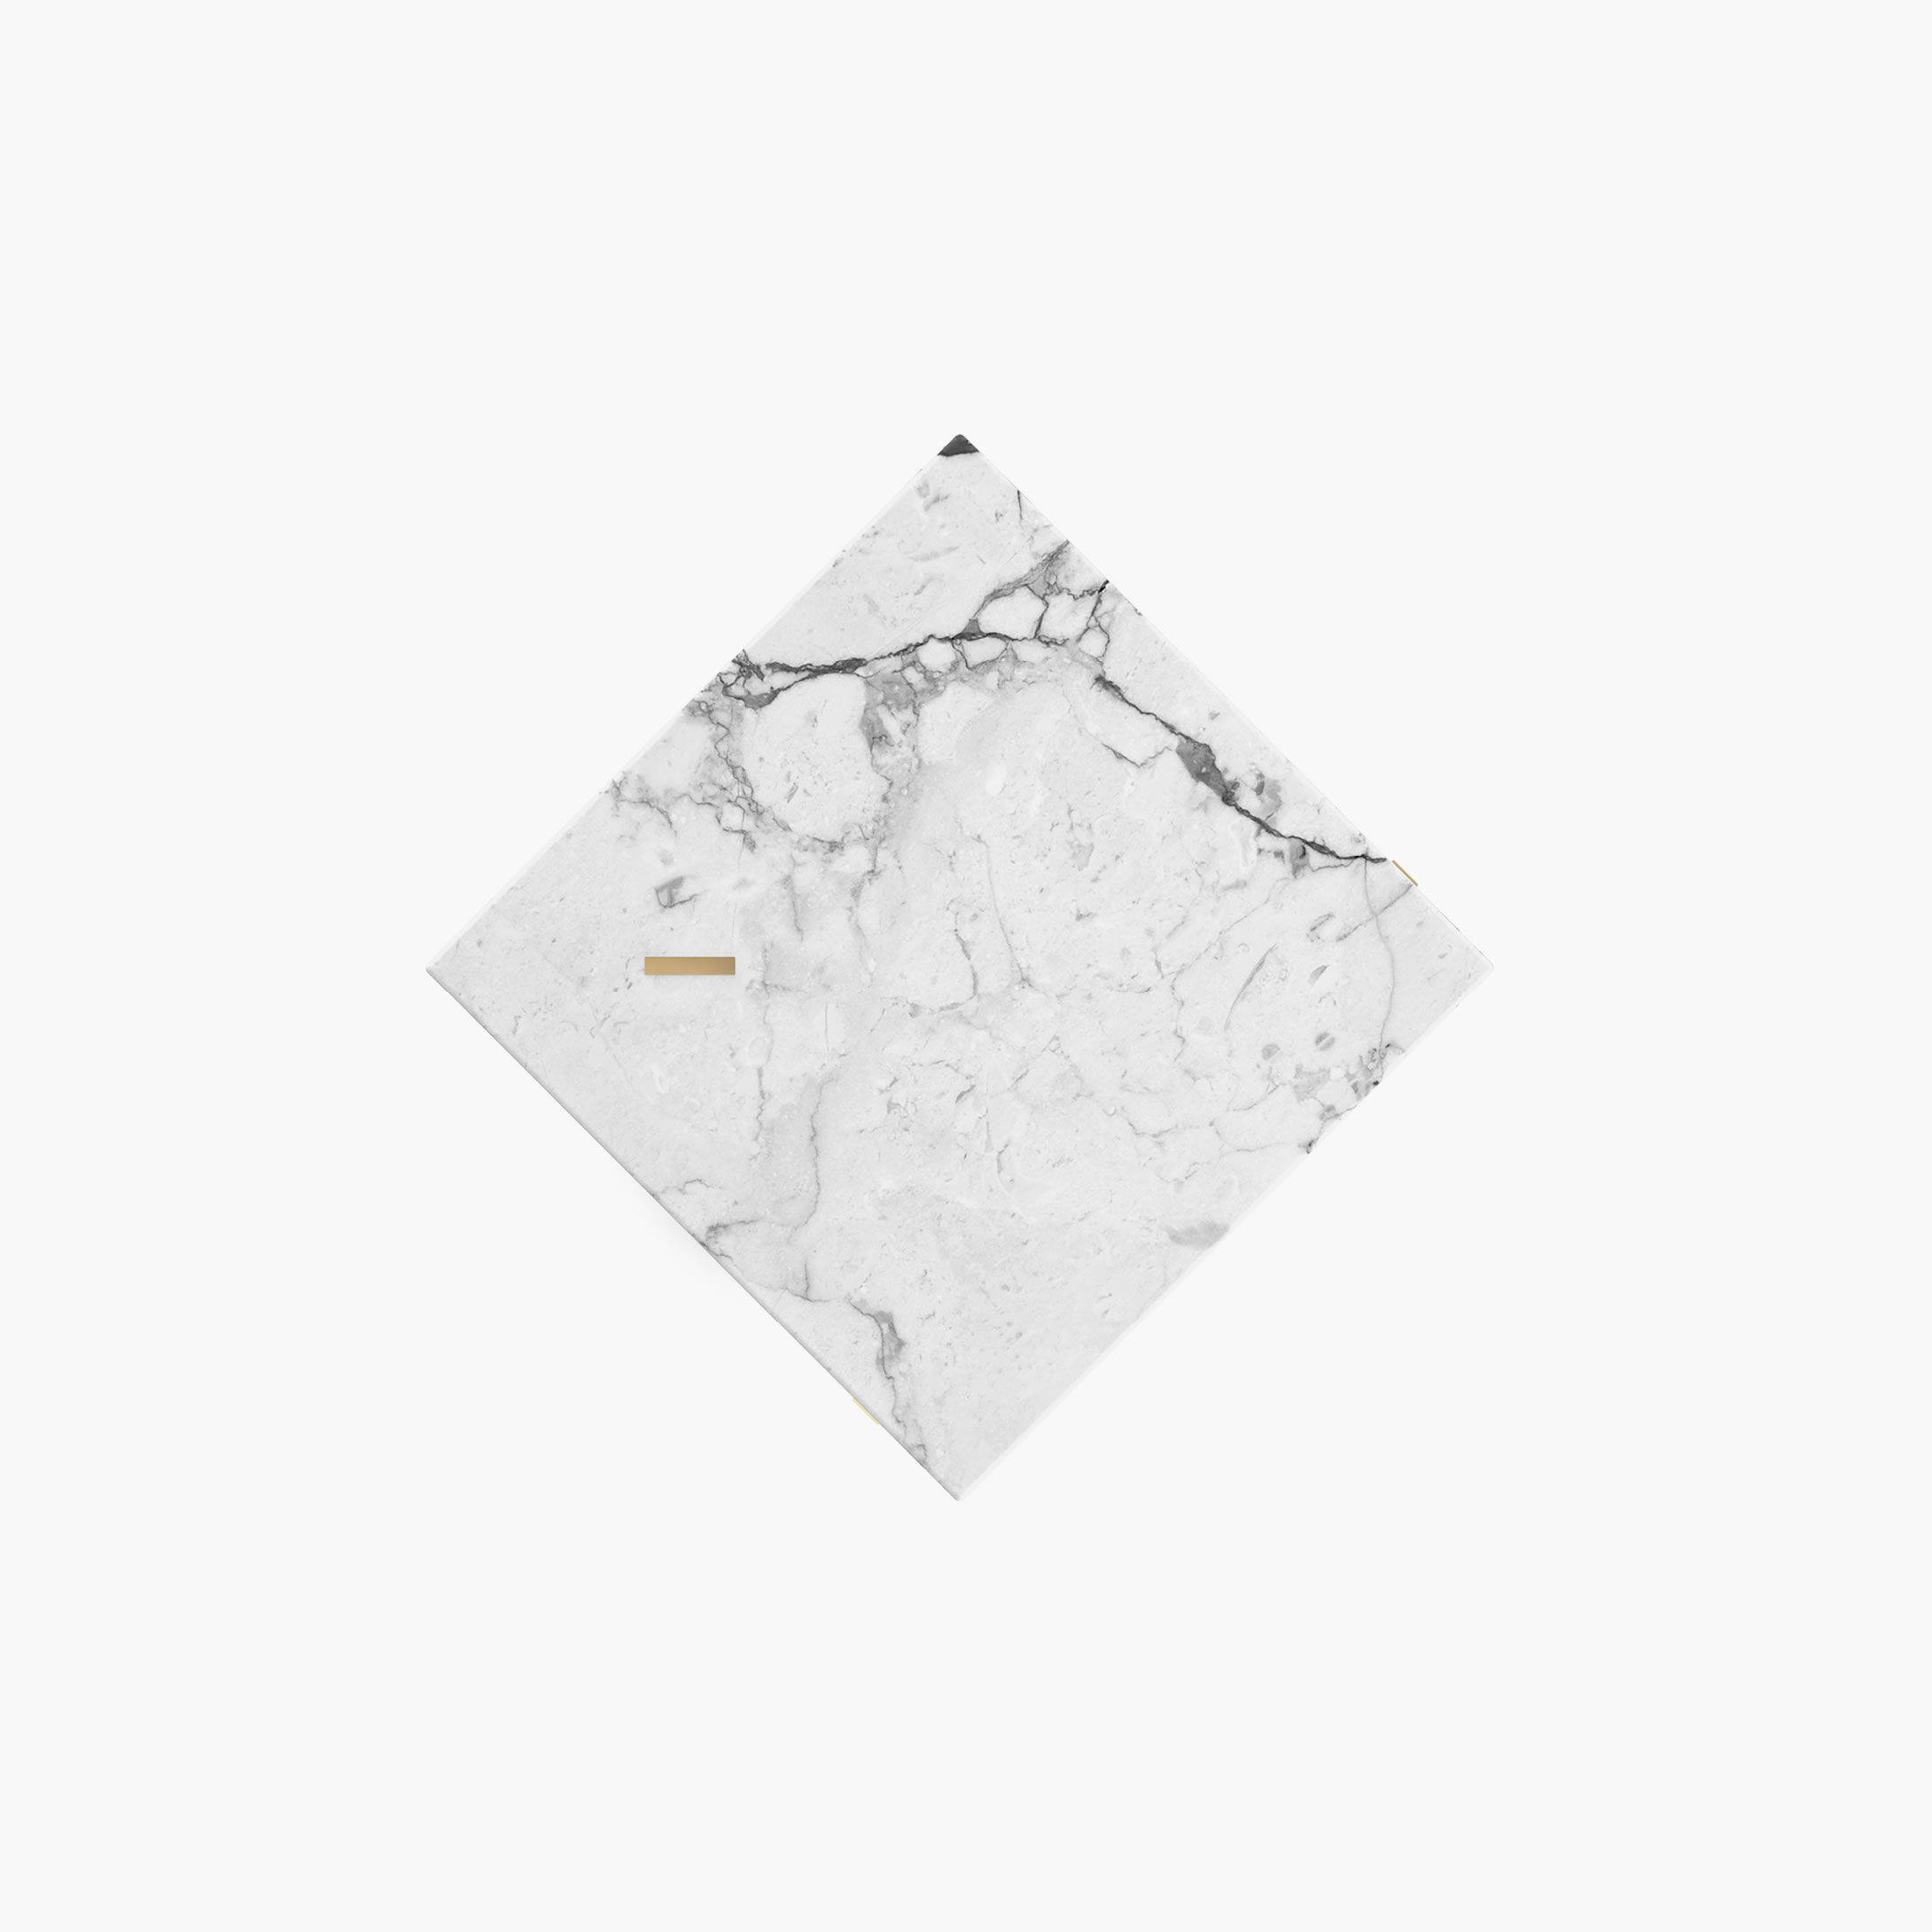 Console Cylinder cuboid prism White Arabescato Marble collectible Living Room designs Conso